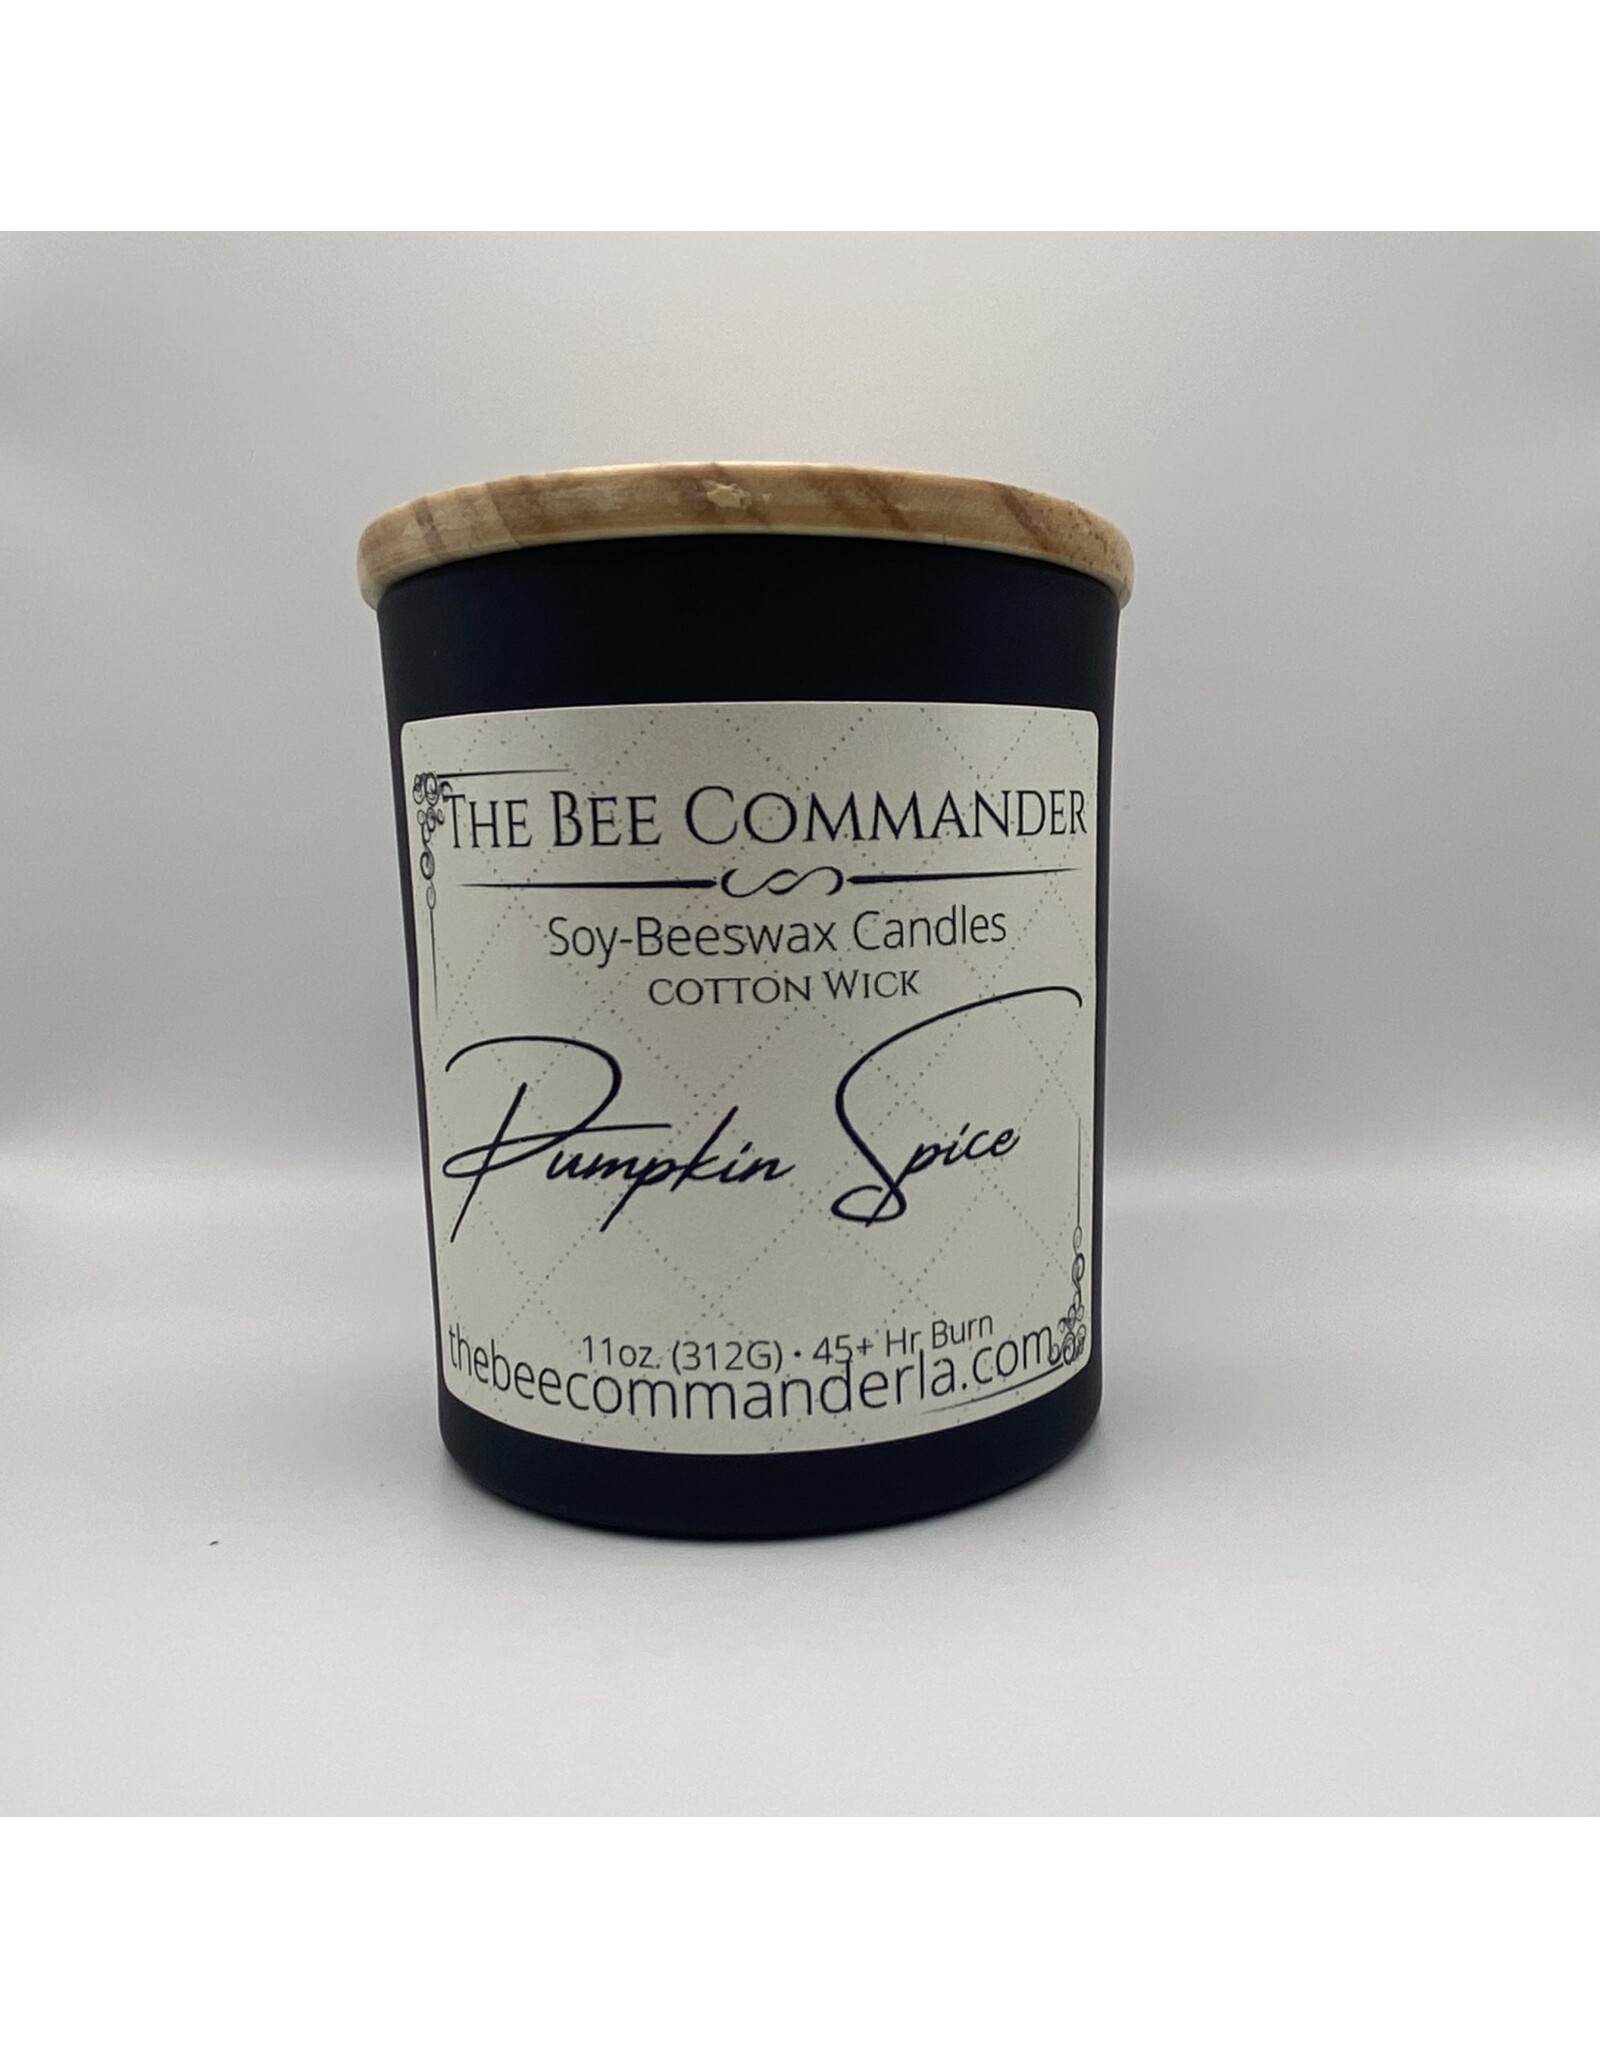 The Bee Commander Pumpkin Spice Soy/Beeswax Candle